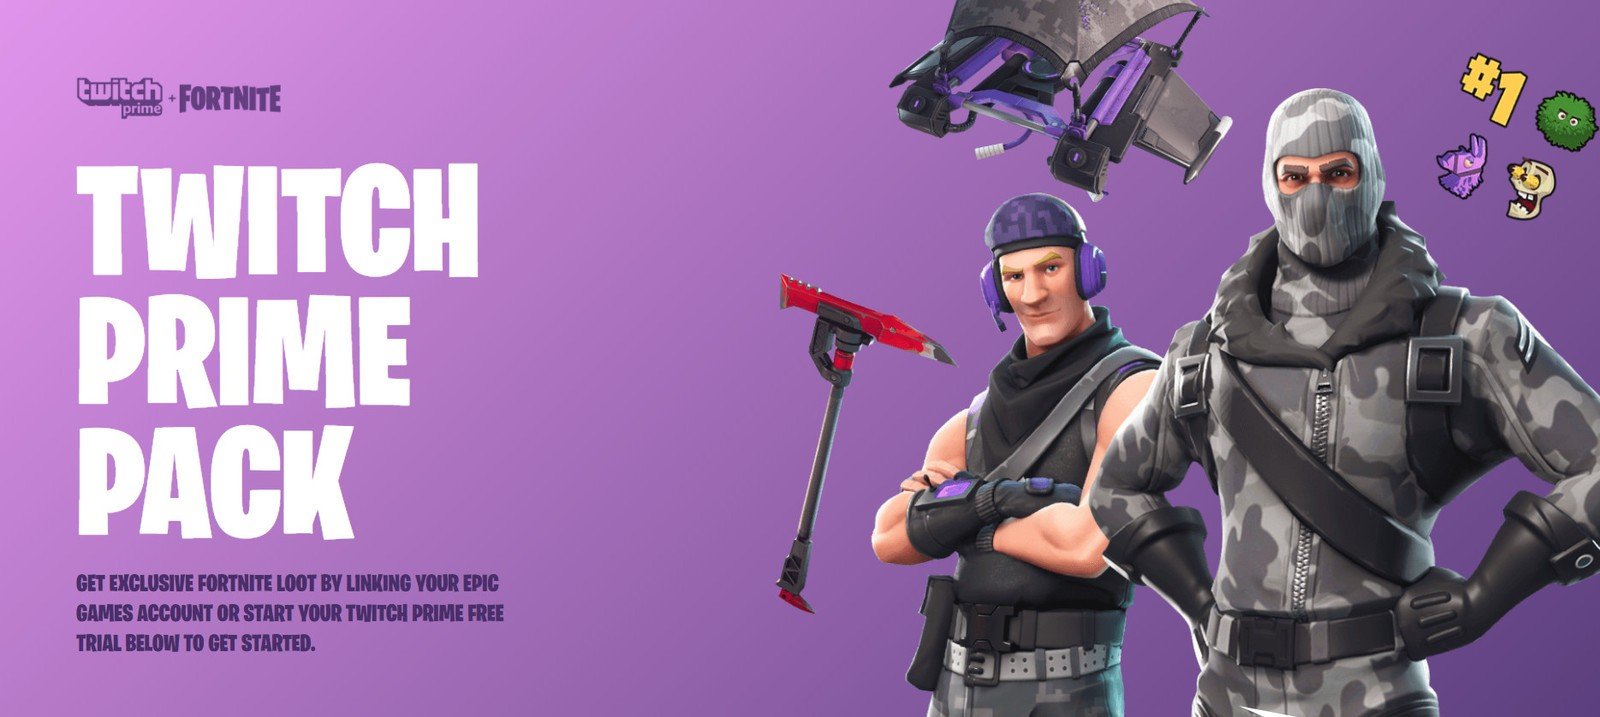 fortnite twitch prime pack pc ps4 xbox one - connect xbox account to pc fortnite